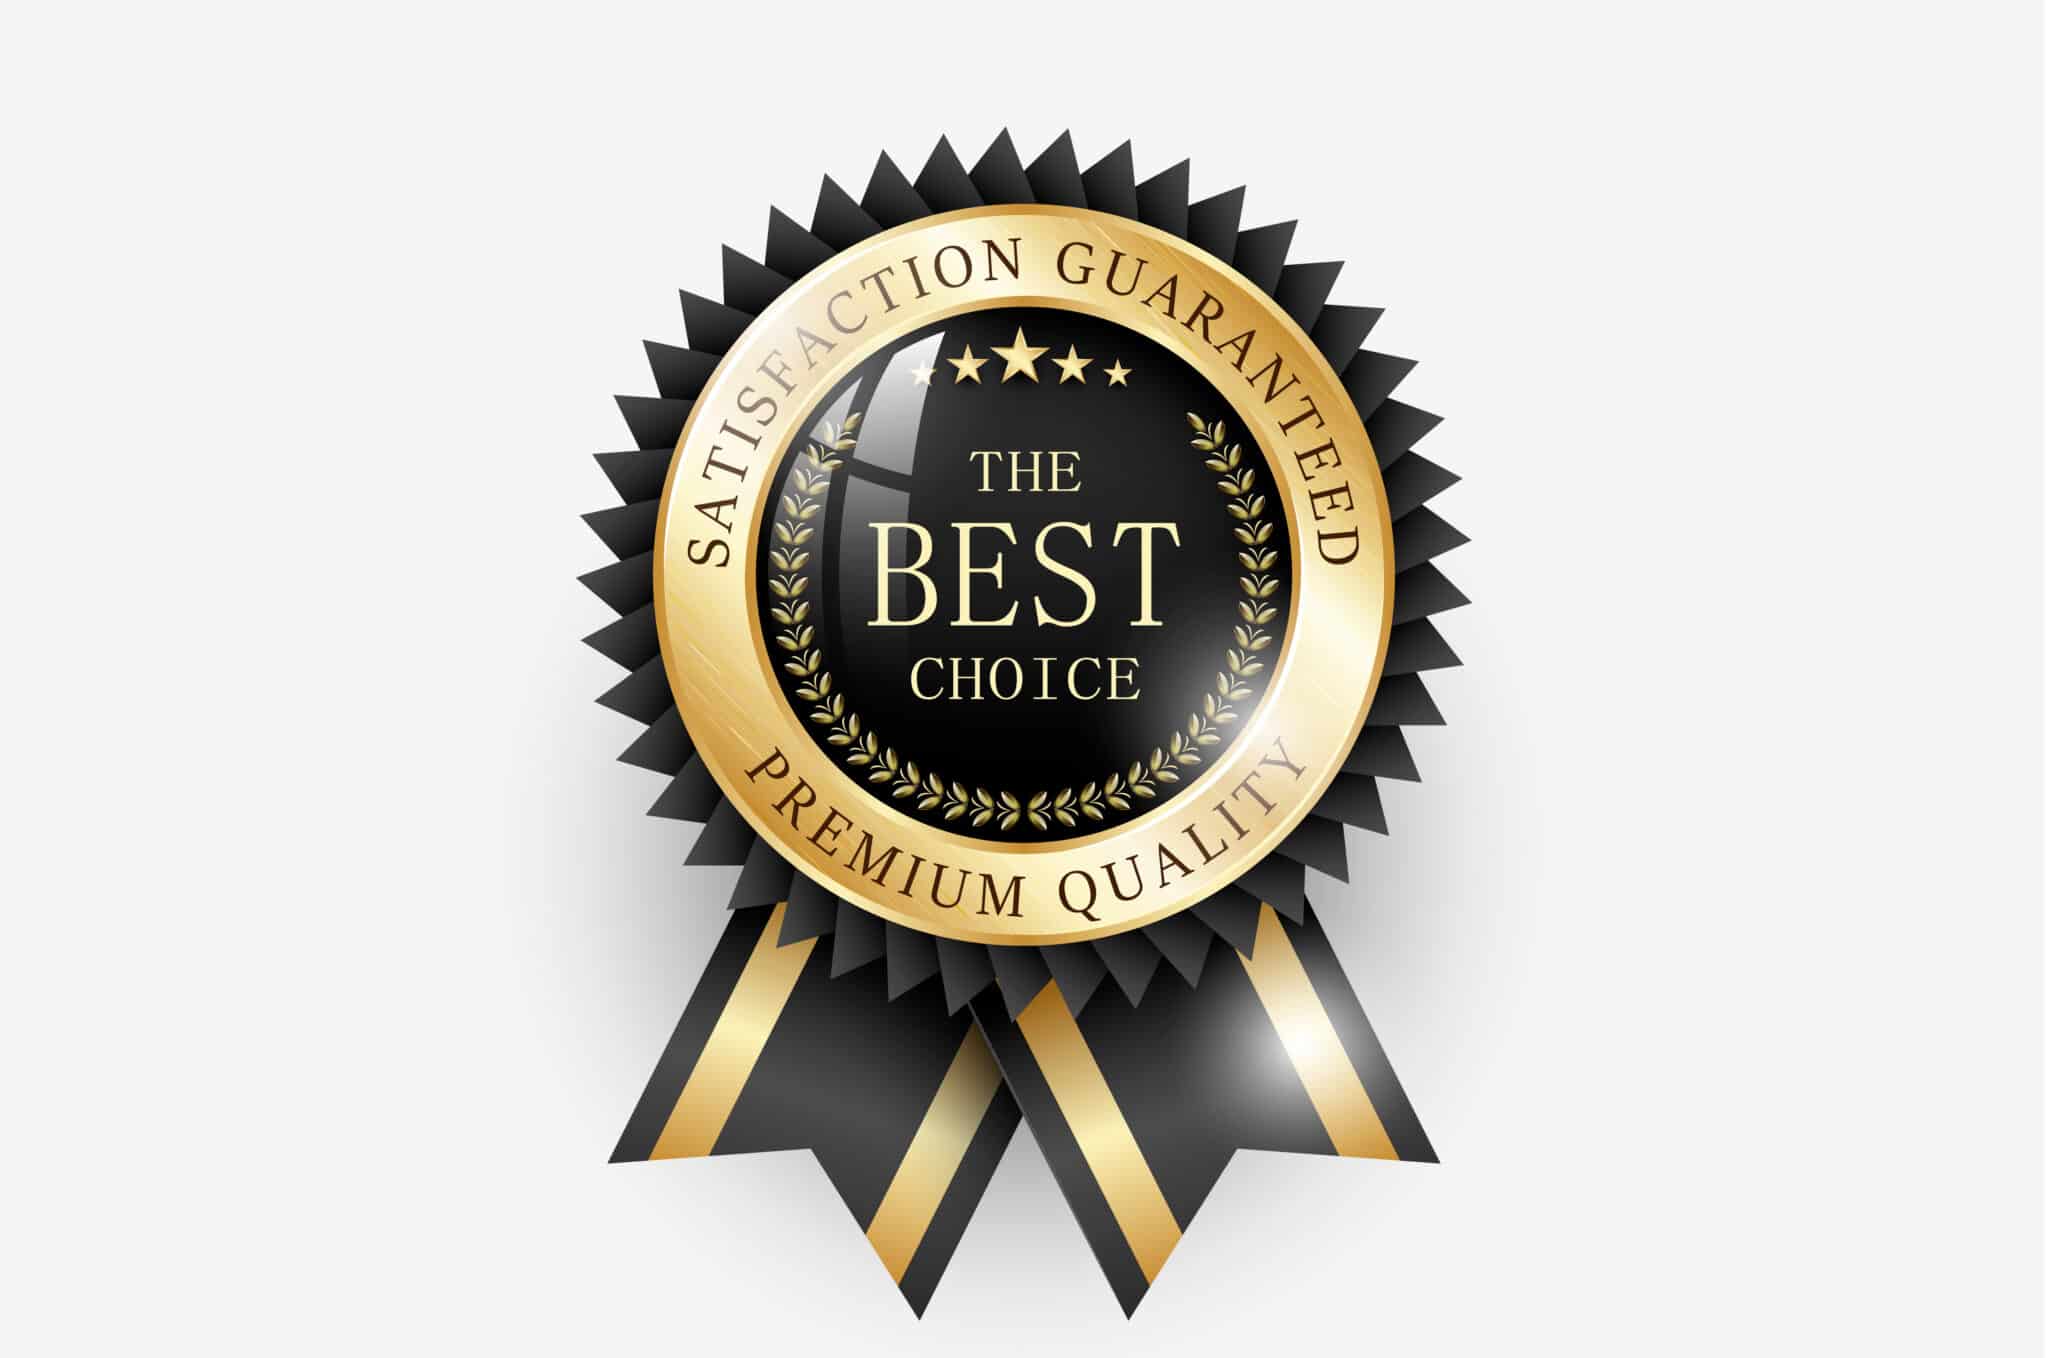 Golden-black best choice medal, symbolizing Athreon as the top-rated transcription service.